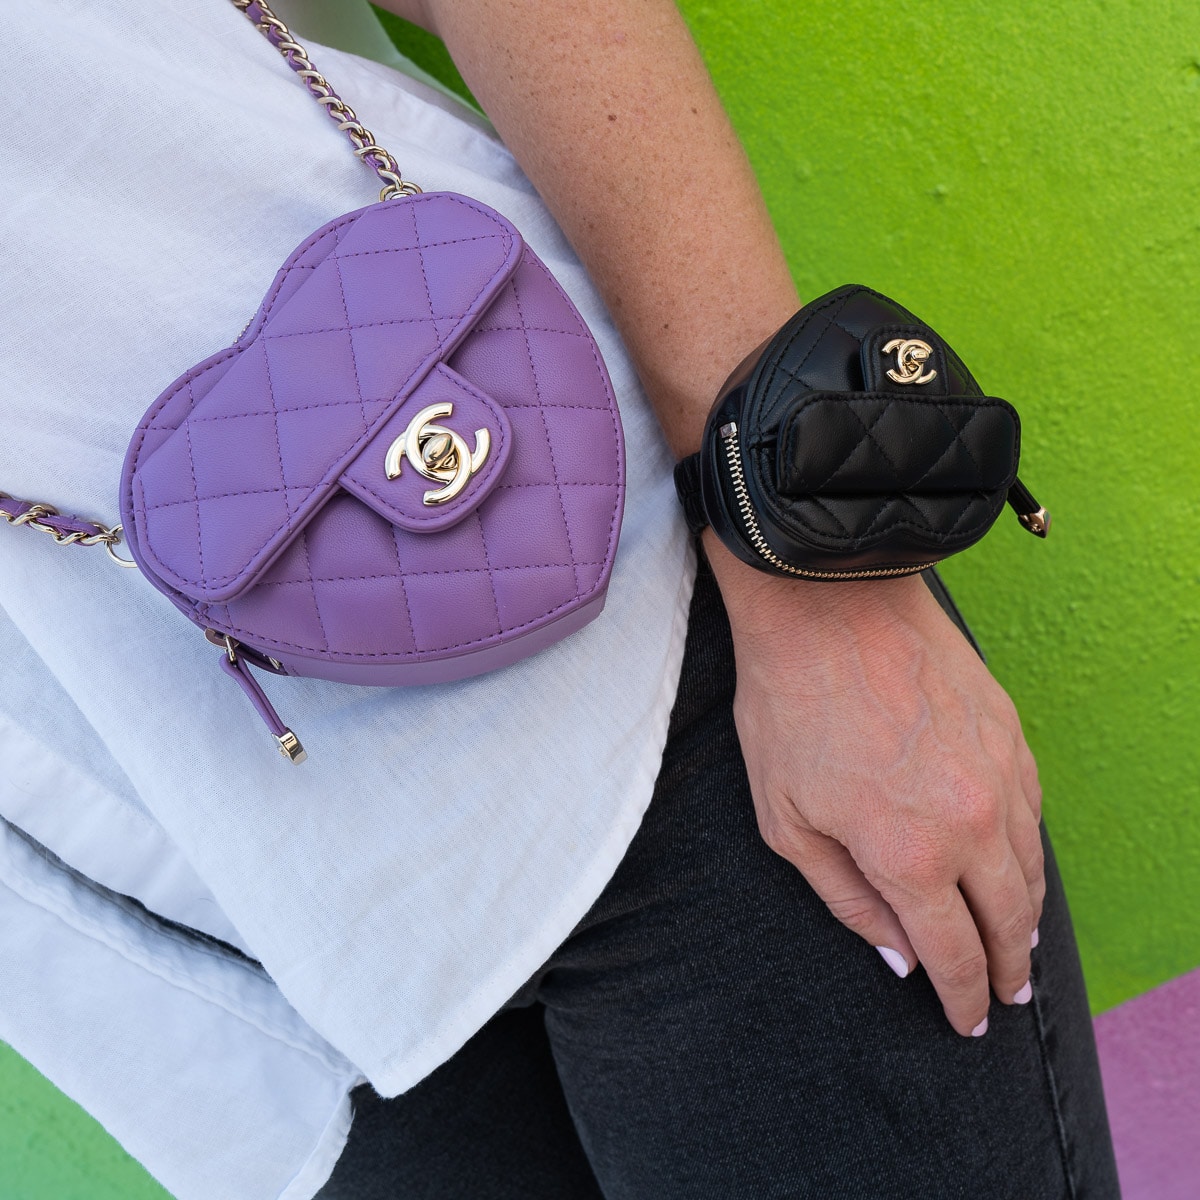 Chanel Heart Bag in Purple and Black Wristlet